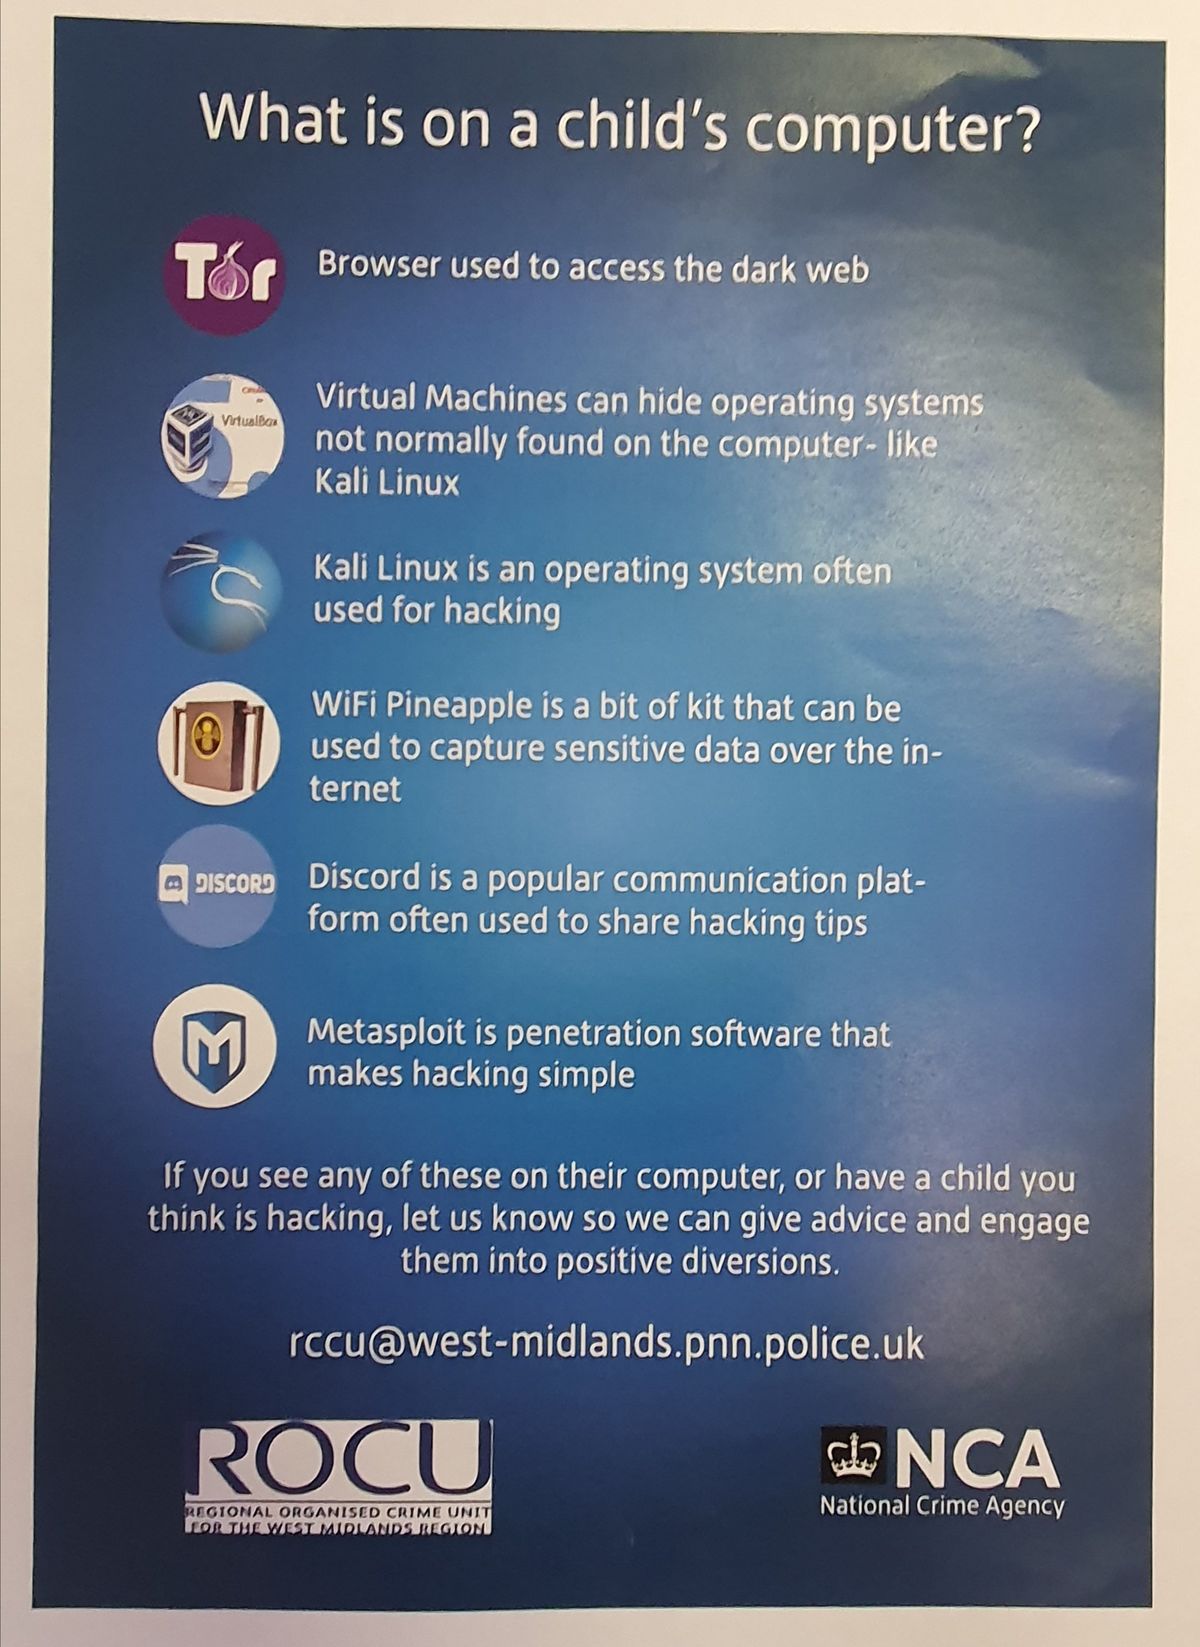 Wondering What Is On A Child's Computer? The United Kingdom's "National